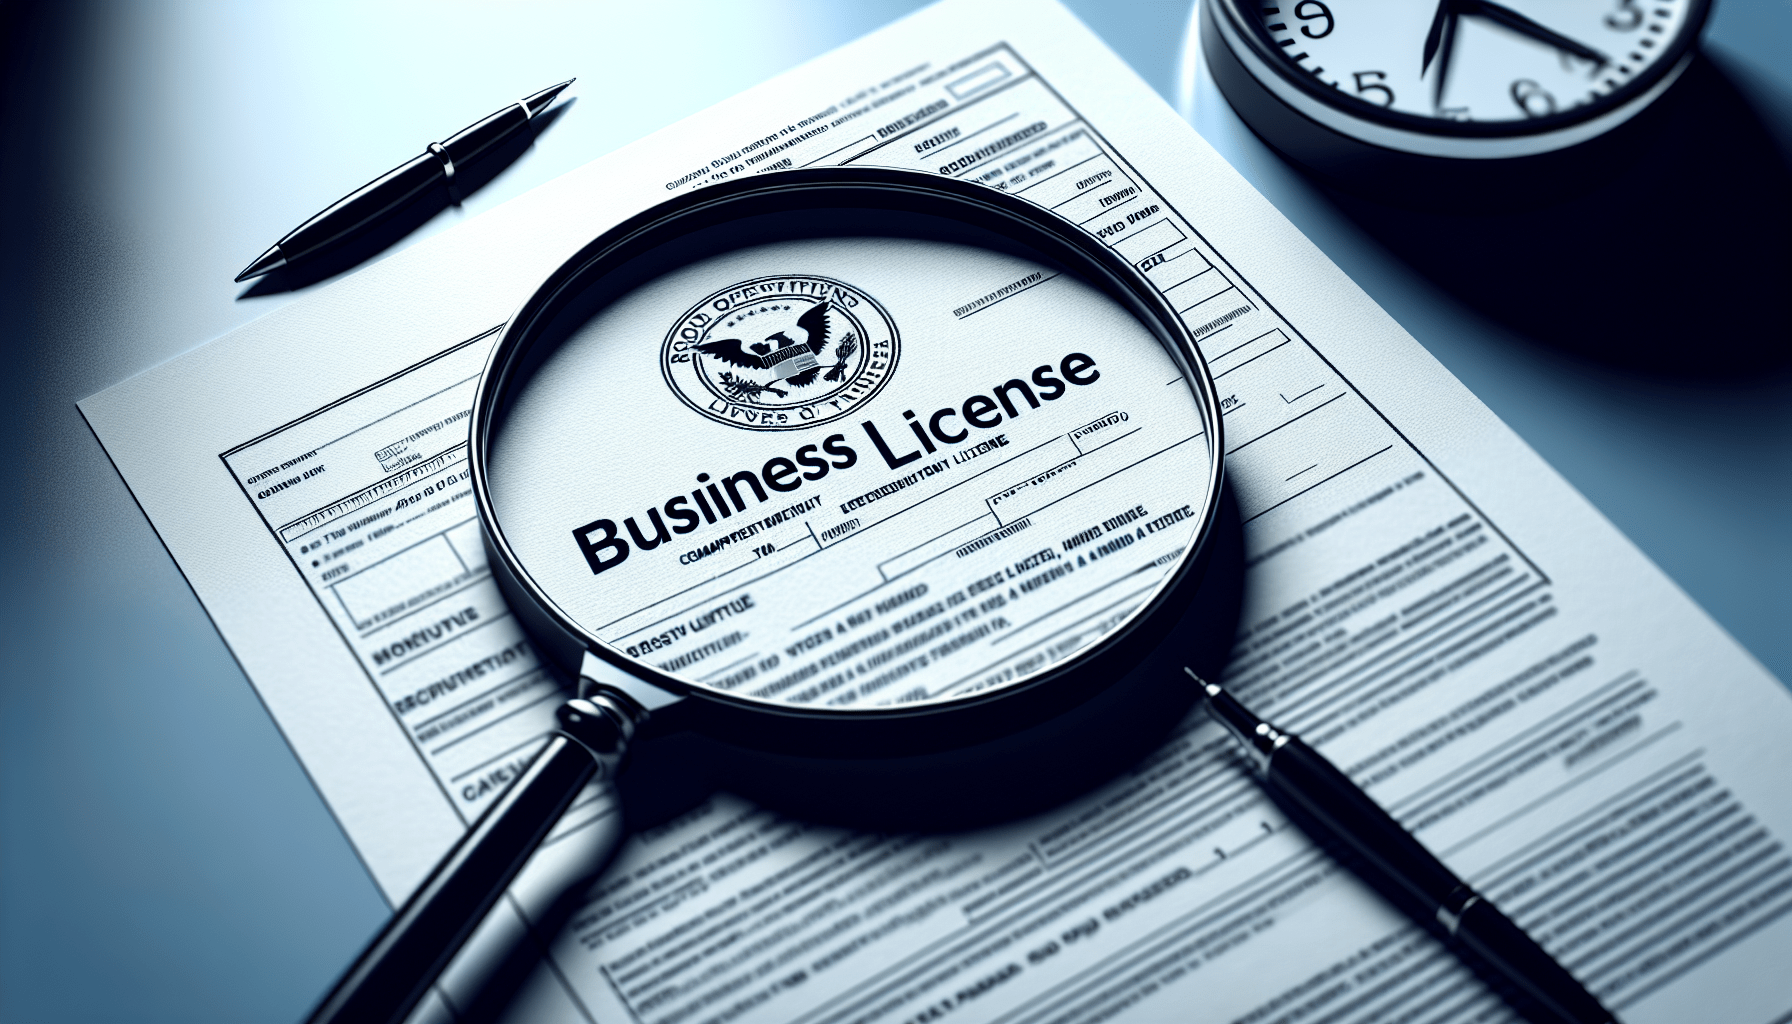 How to Get a Business License in Roville in 1 Hour